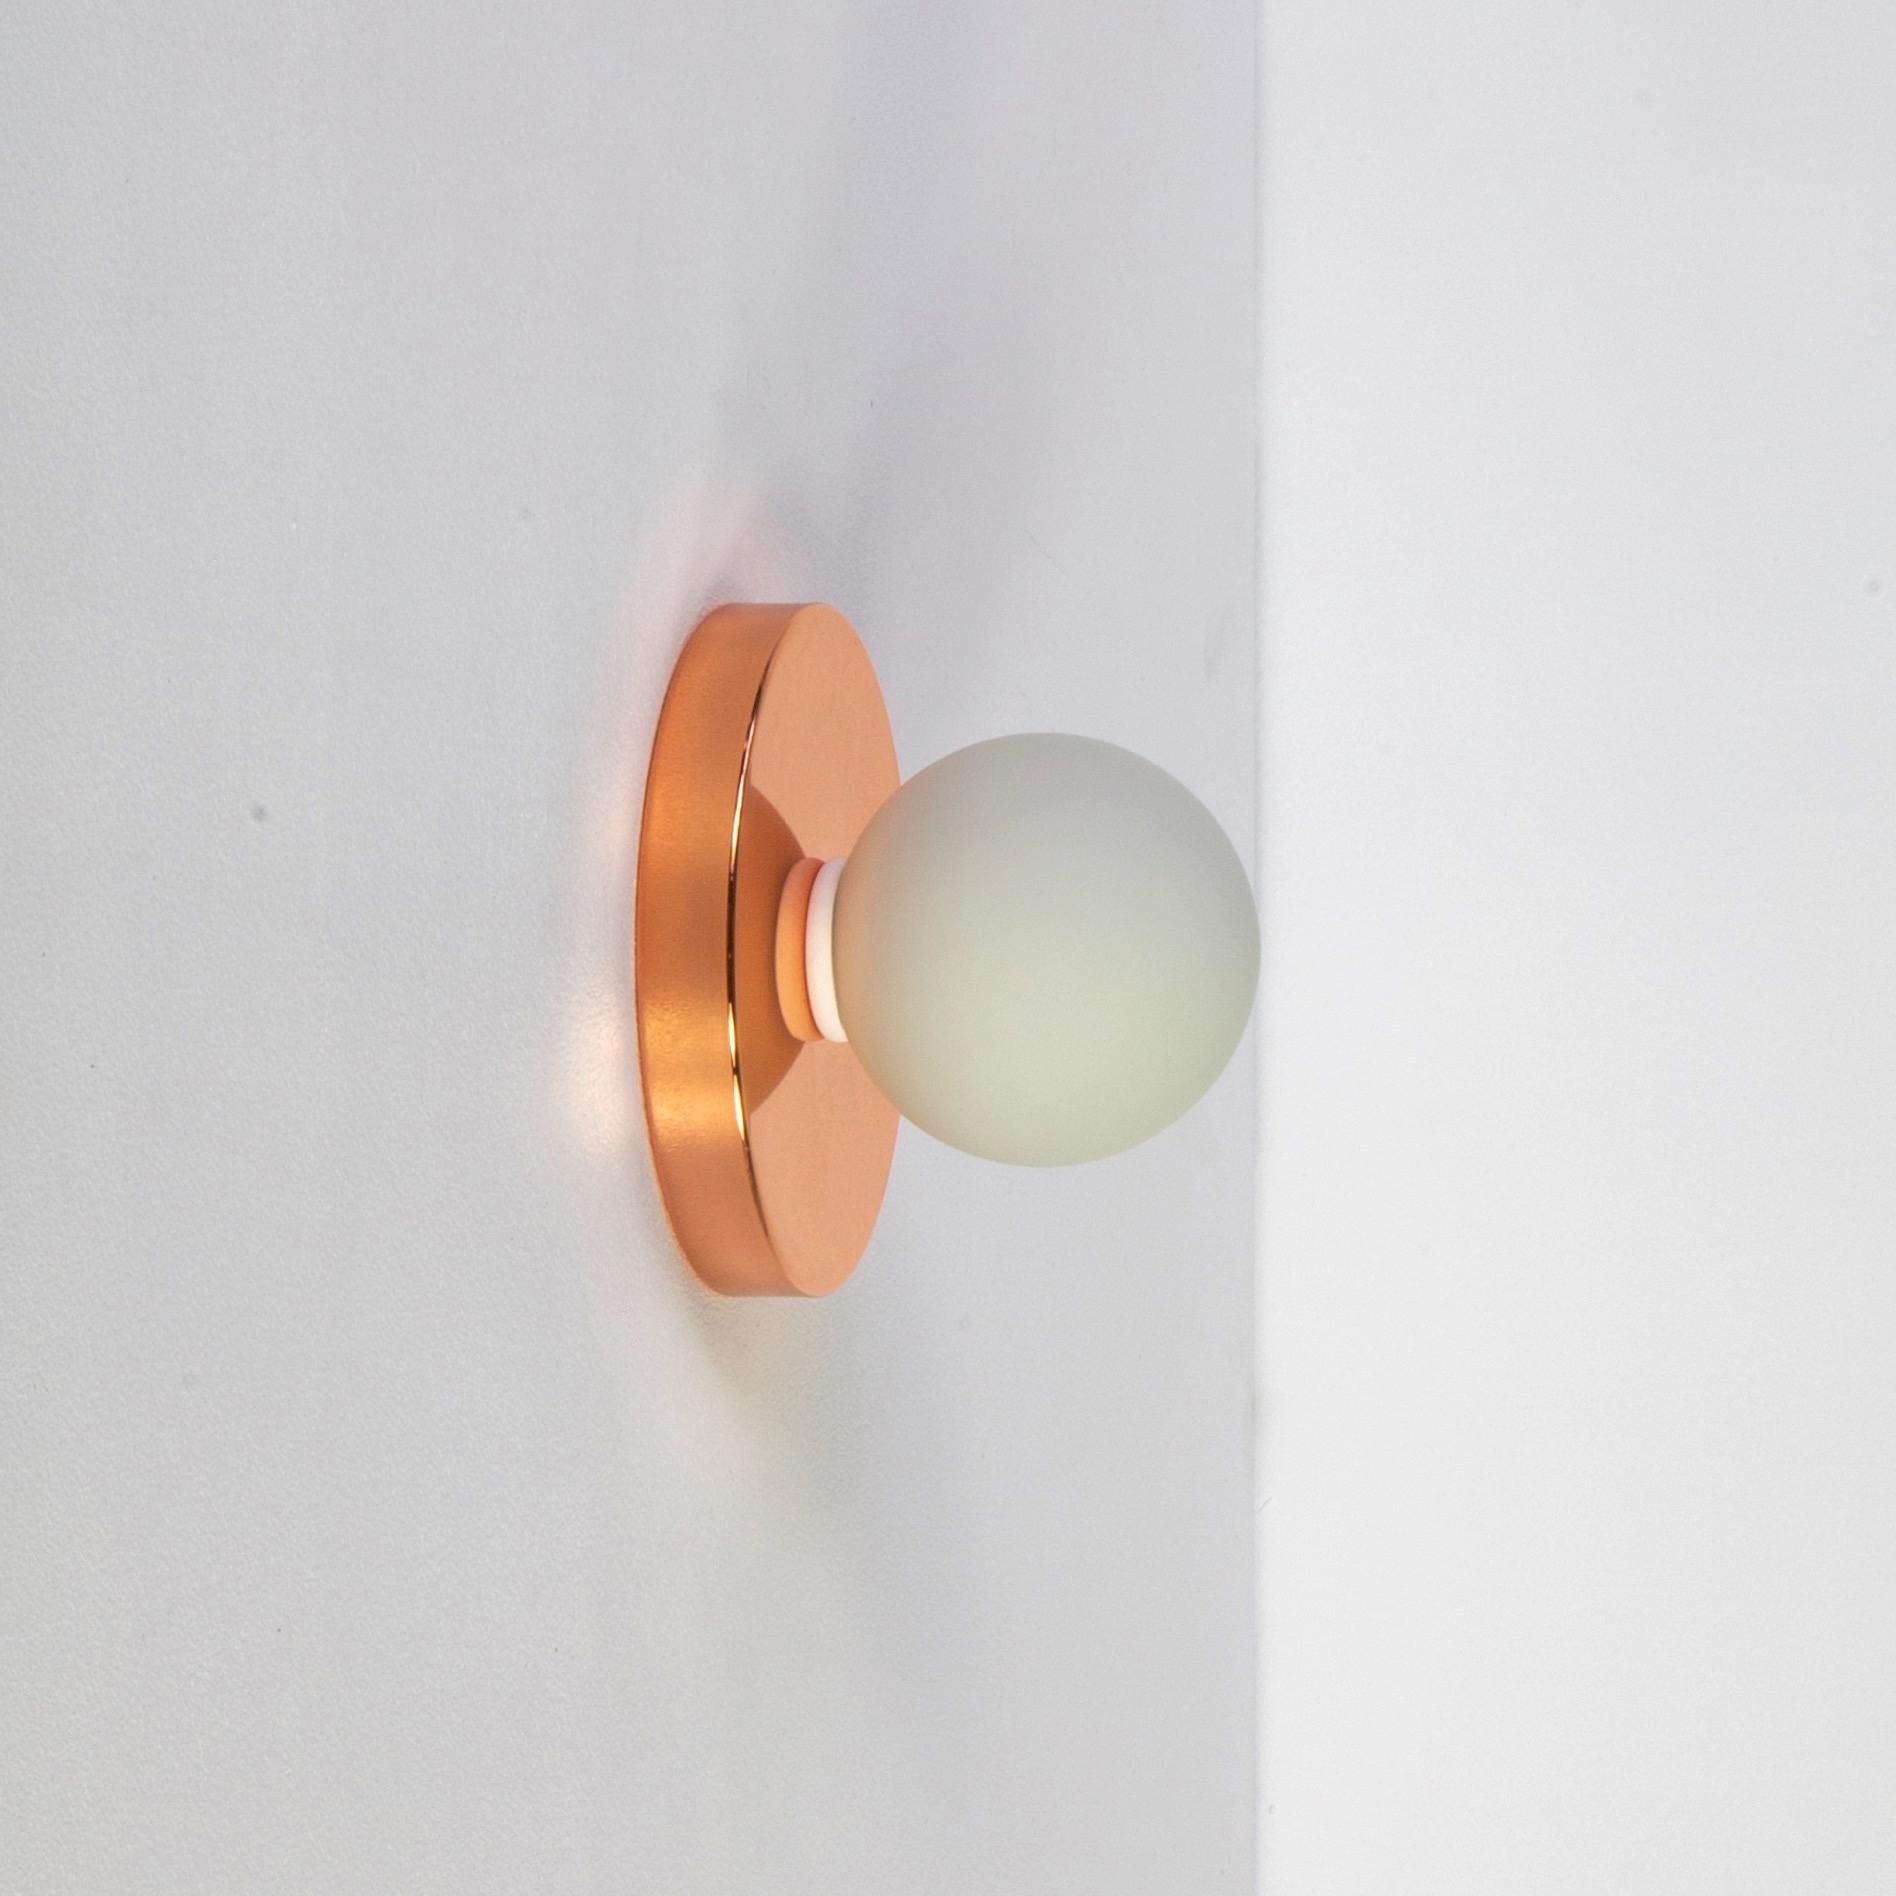 This listing is for 4x Globe Sconces in copper designed and manufactured by Research.Lighting.

Materials: Brass, Steel & Glass
Finish: Copper
Electronics: 1x G9 Socket, 1x 4.5 Watt LED Bulb (included), 450 Lumens
ADA Compliant. UL Listed. Made in